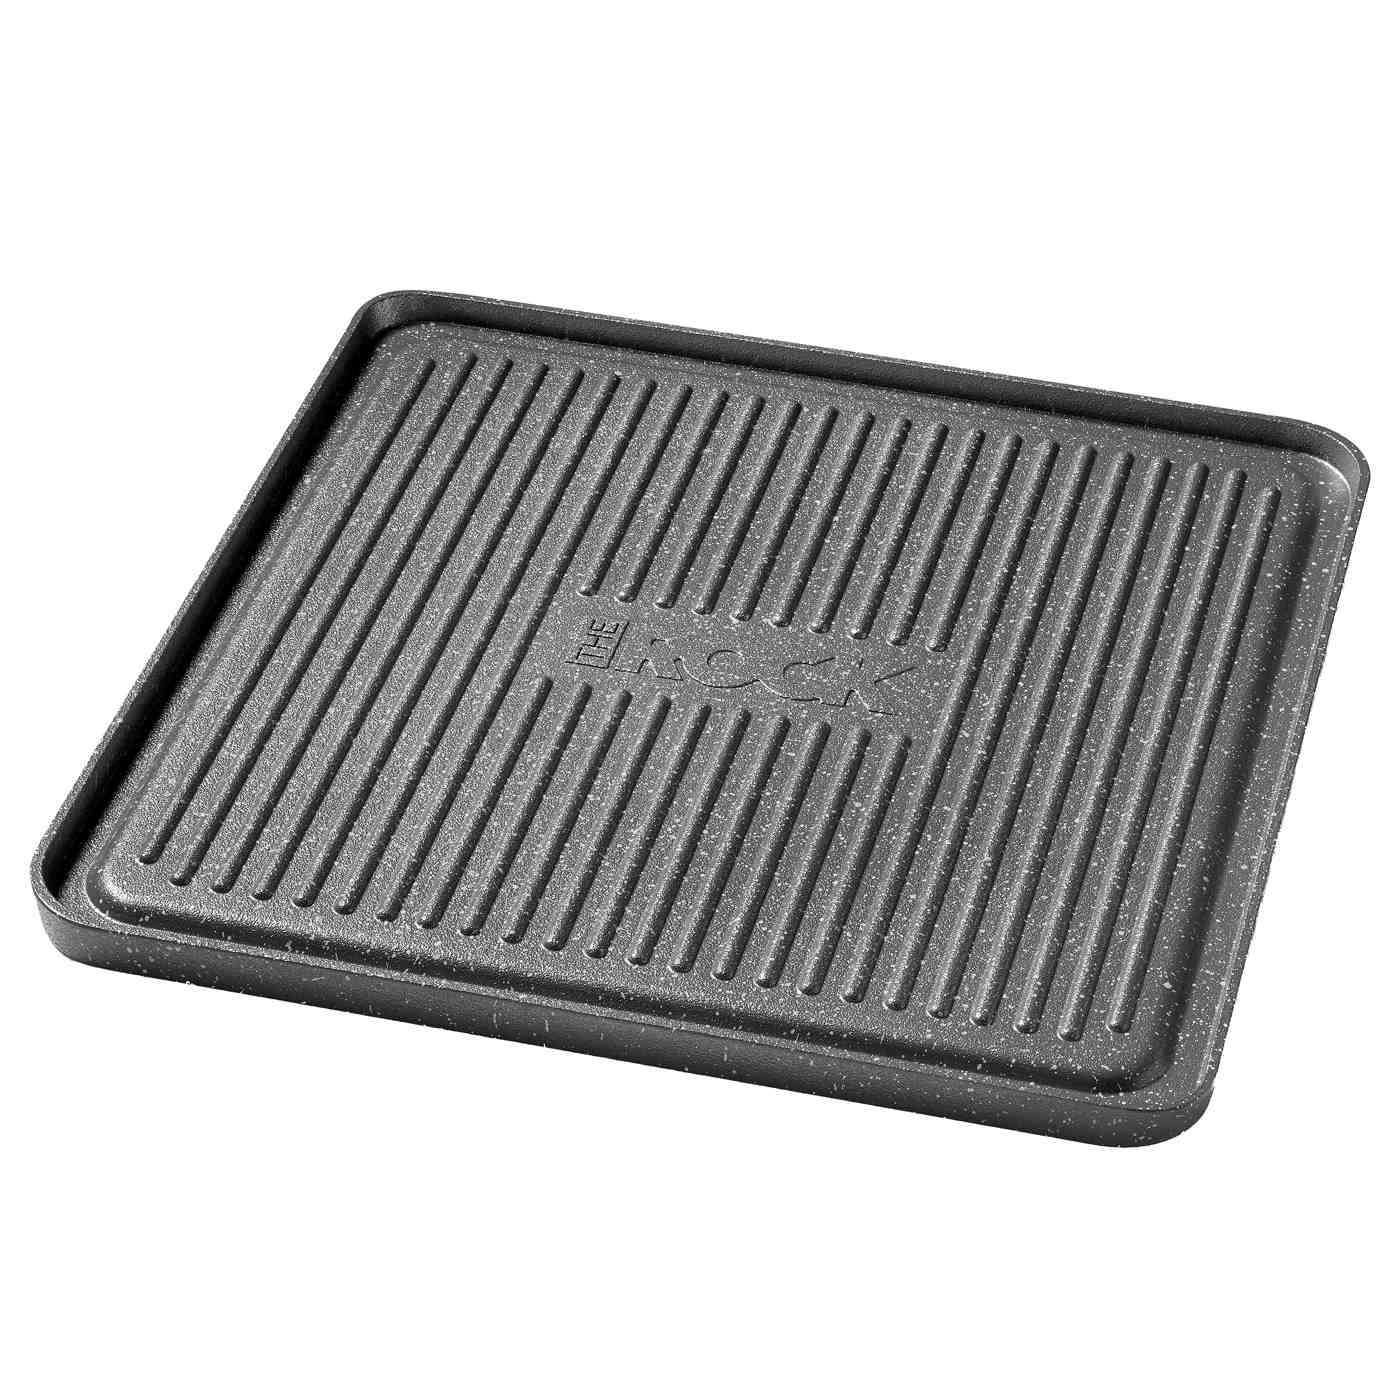 Starfit The Rock Reversible Griddle with Stainless Steel Basket